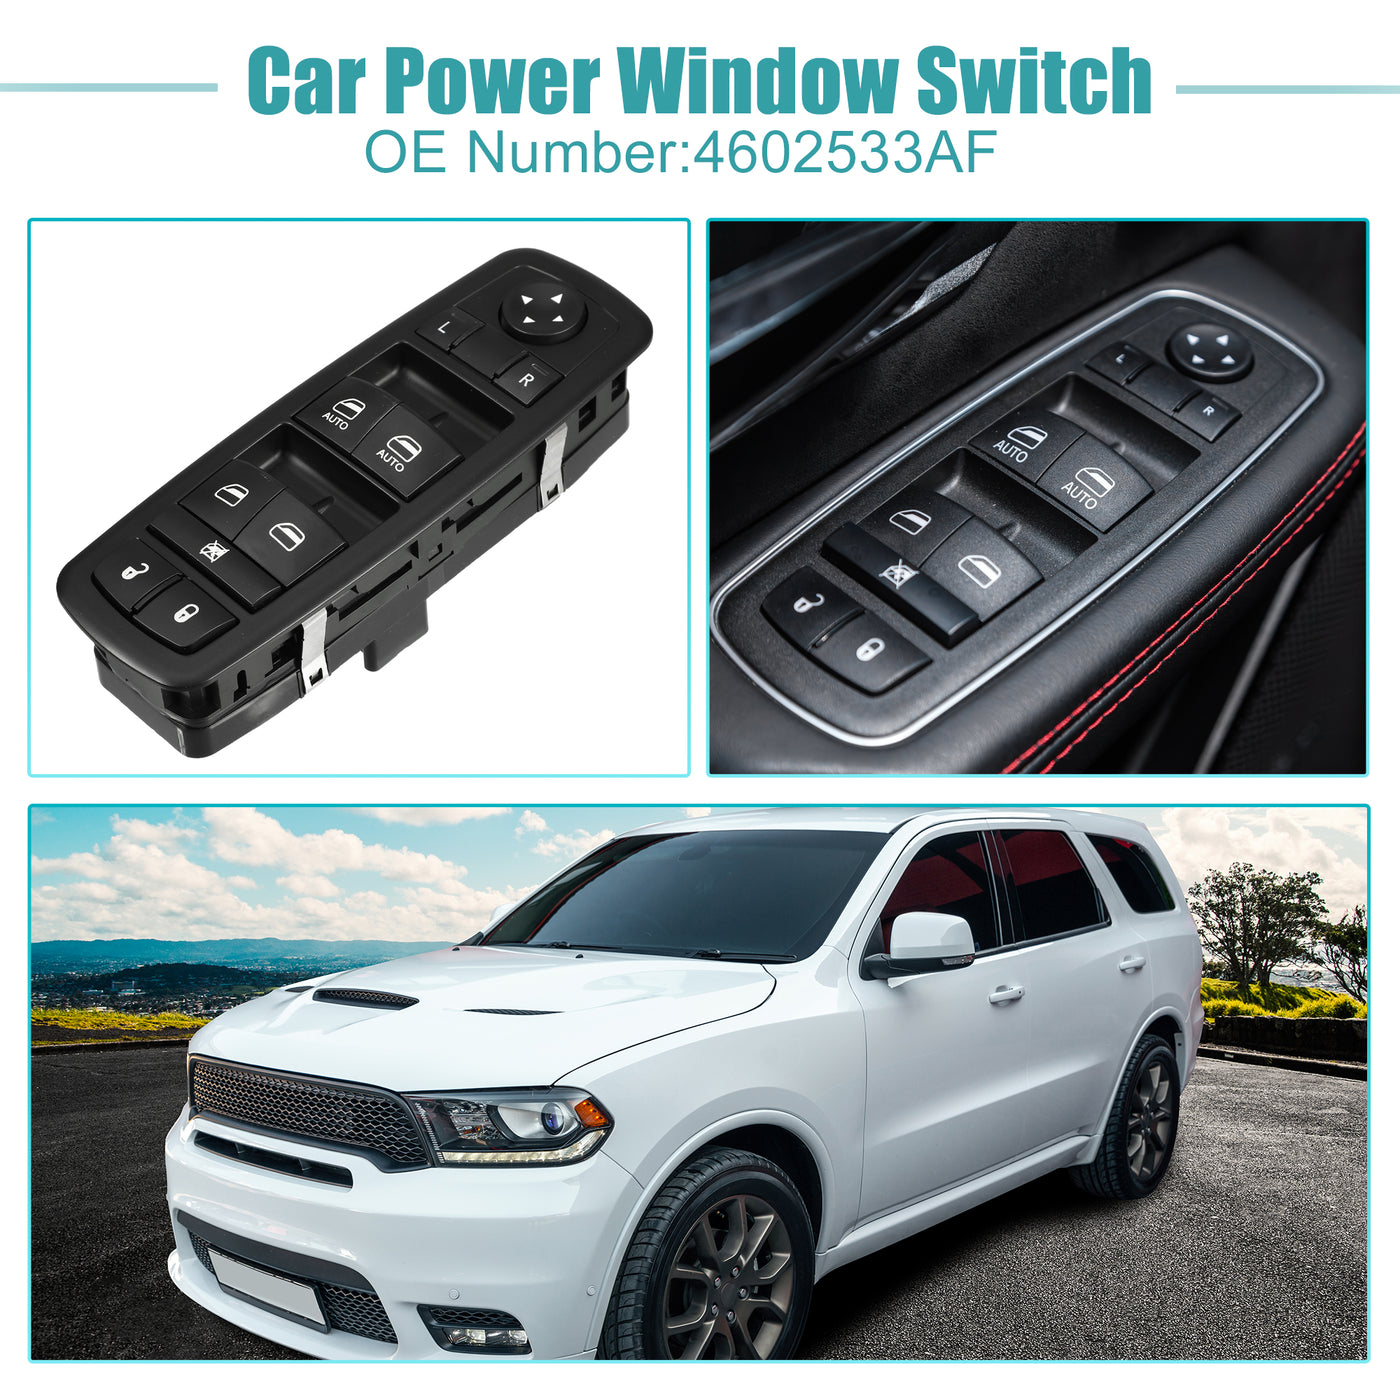 ACROPIX Power Window Switch Window Control Switch Fit for Dodge Durango 2014-2015 for Jeep Grand Cherokee 2014 with Removal Tool No.68184802AA - Pack of 1